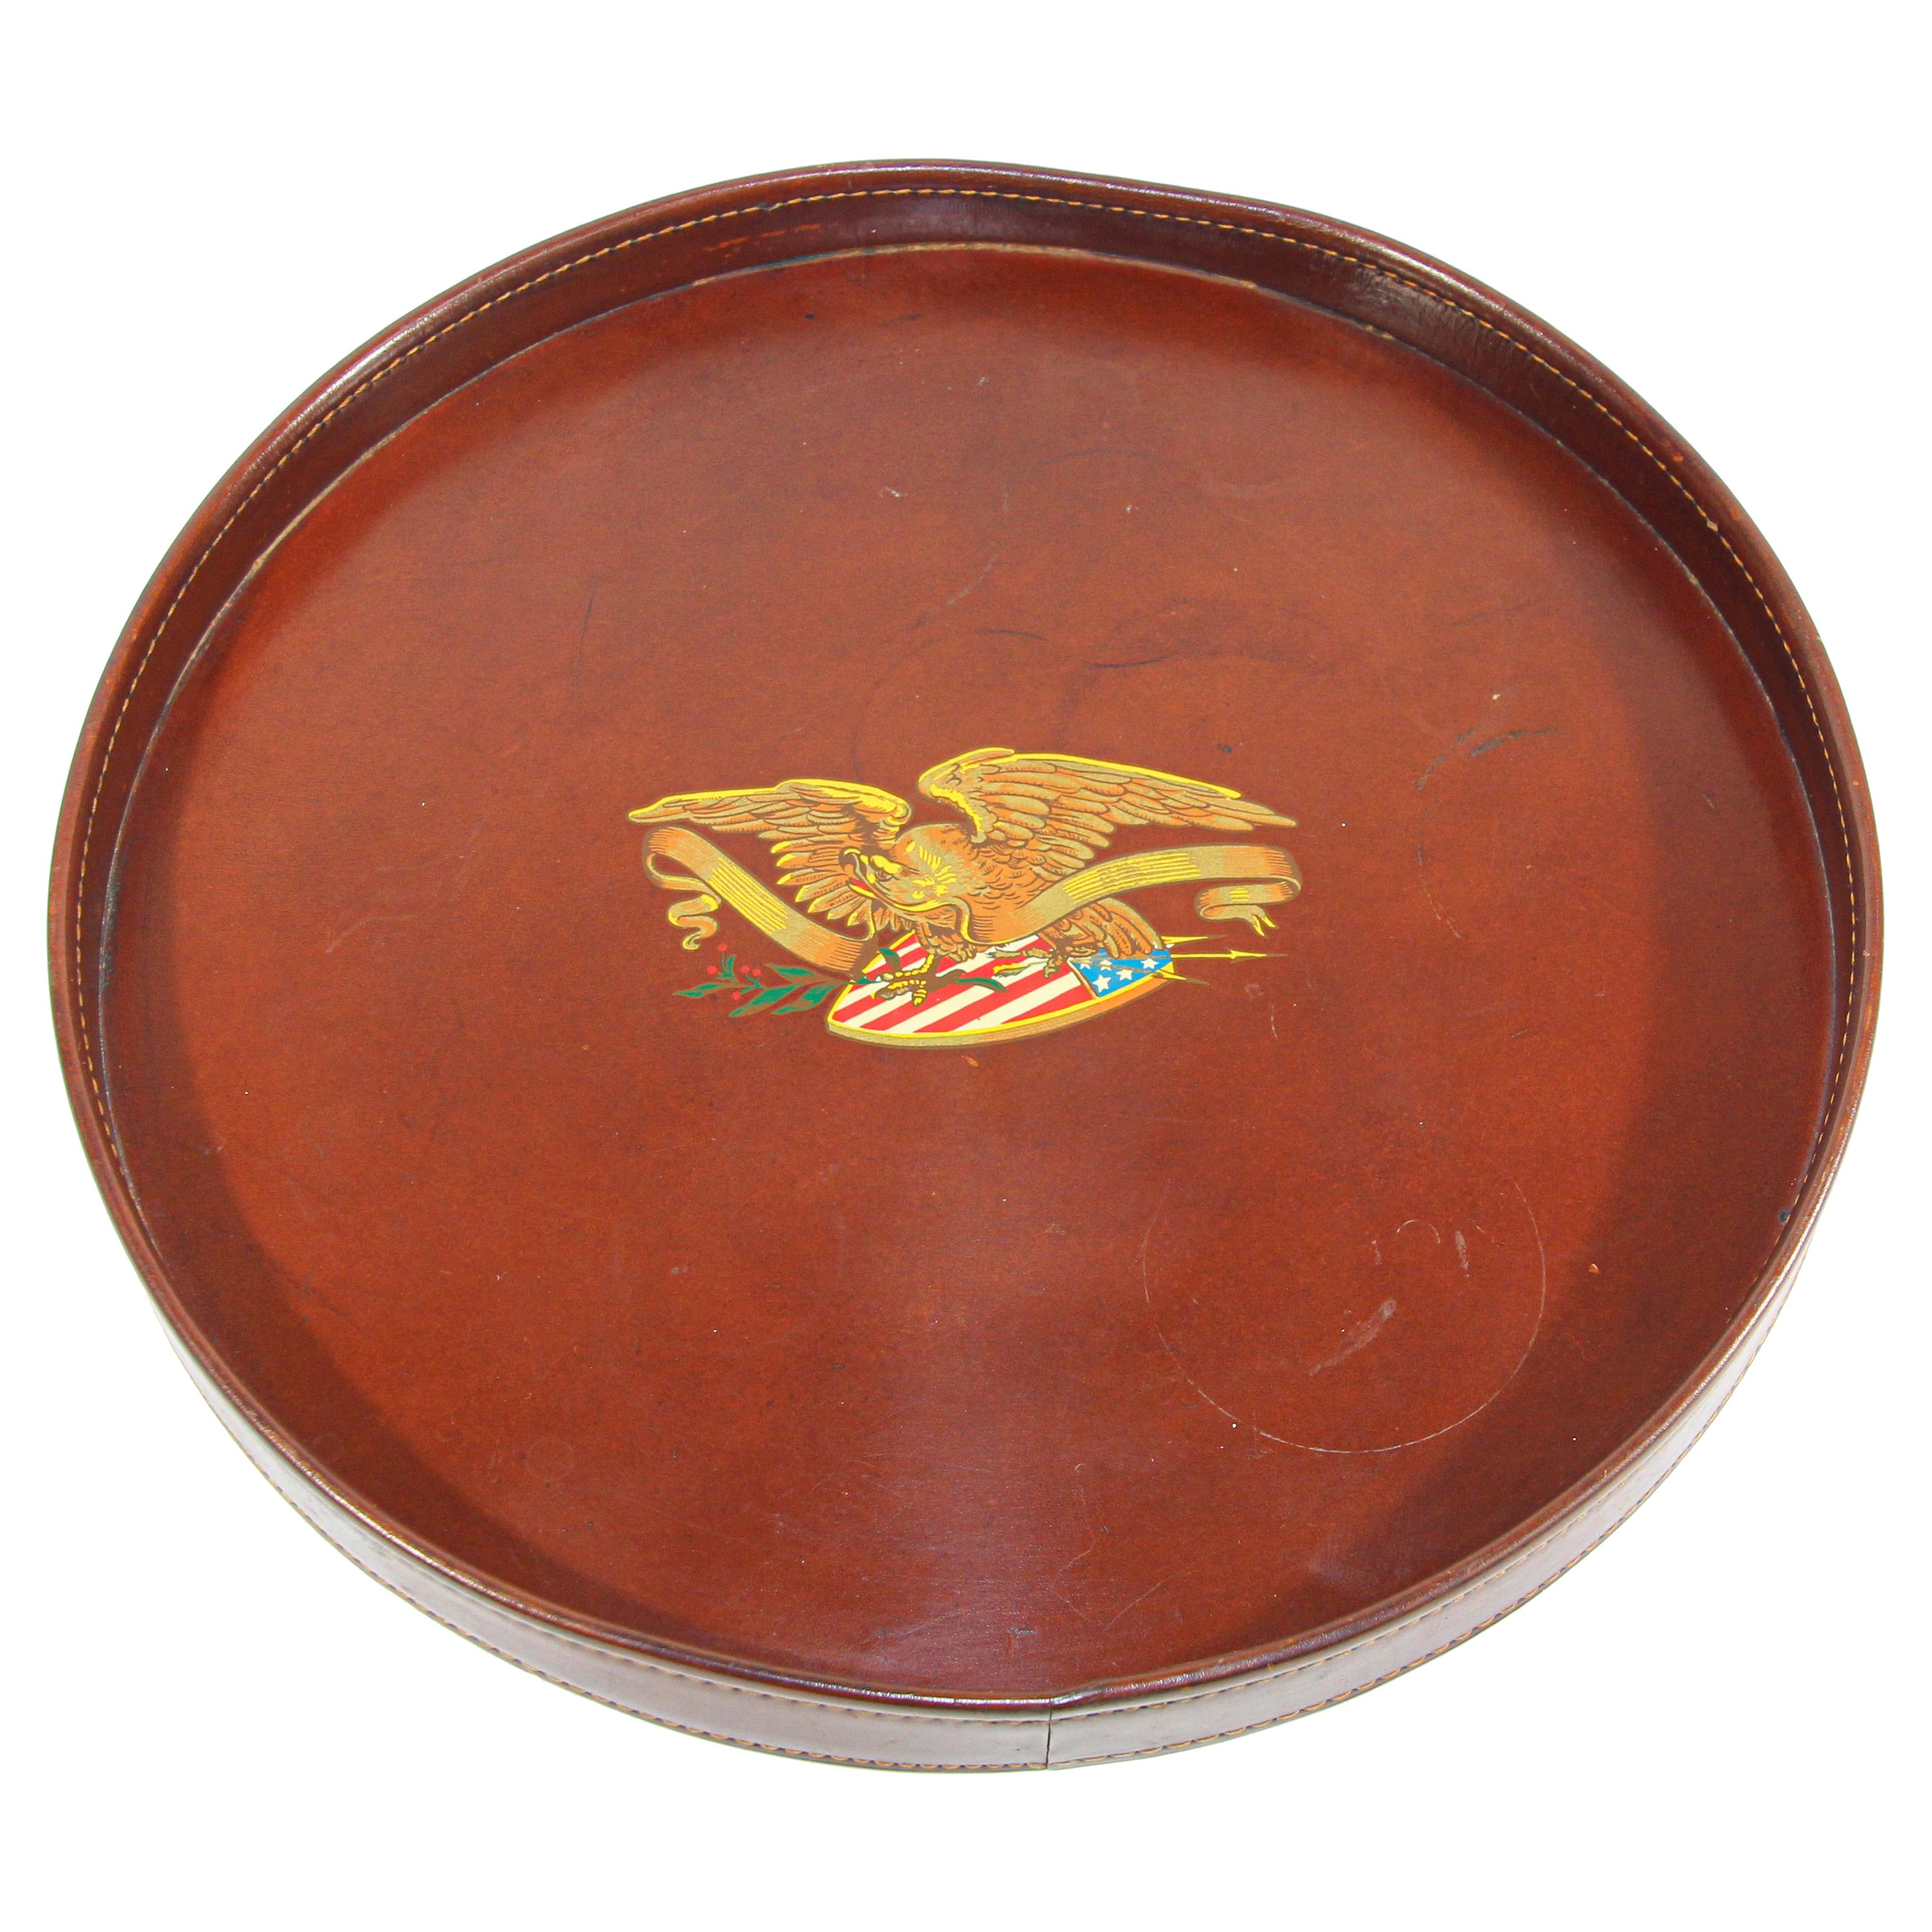 Vintage Round Brown Leather Tray with The American Bold Eagle and US Flag